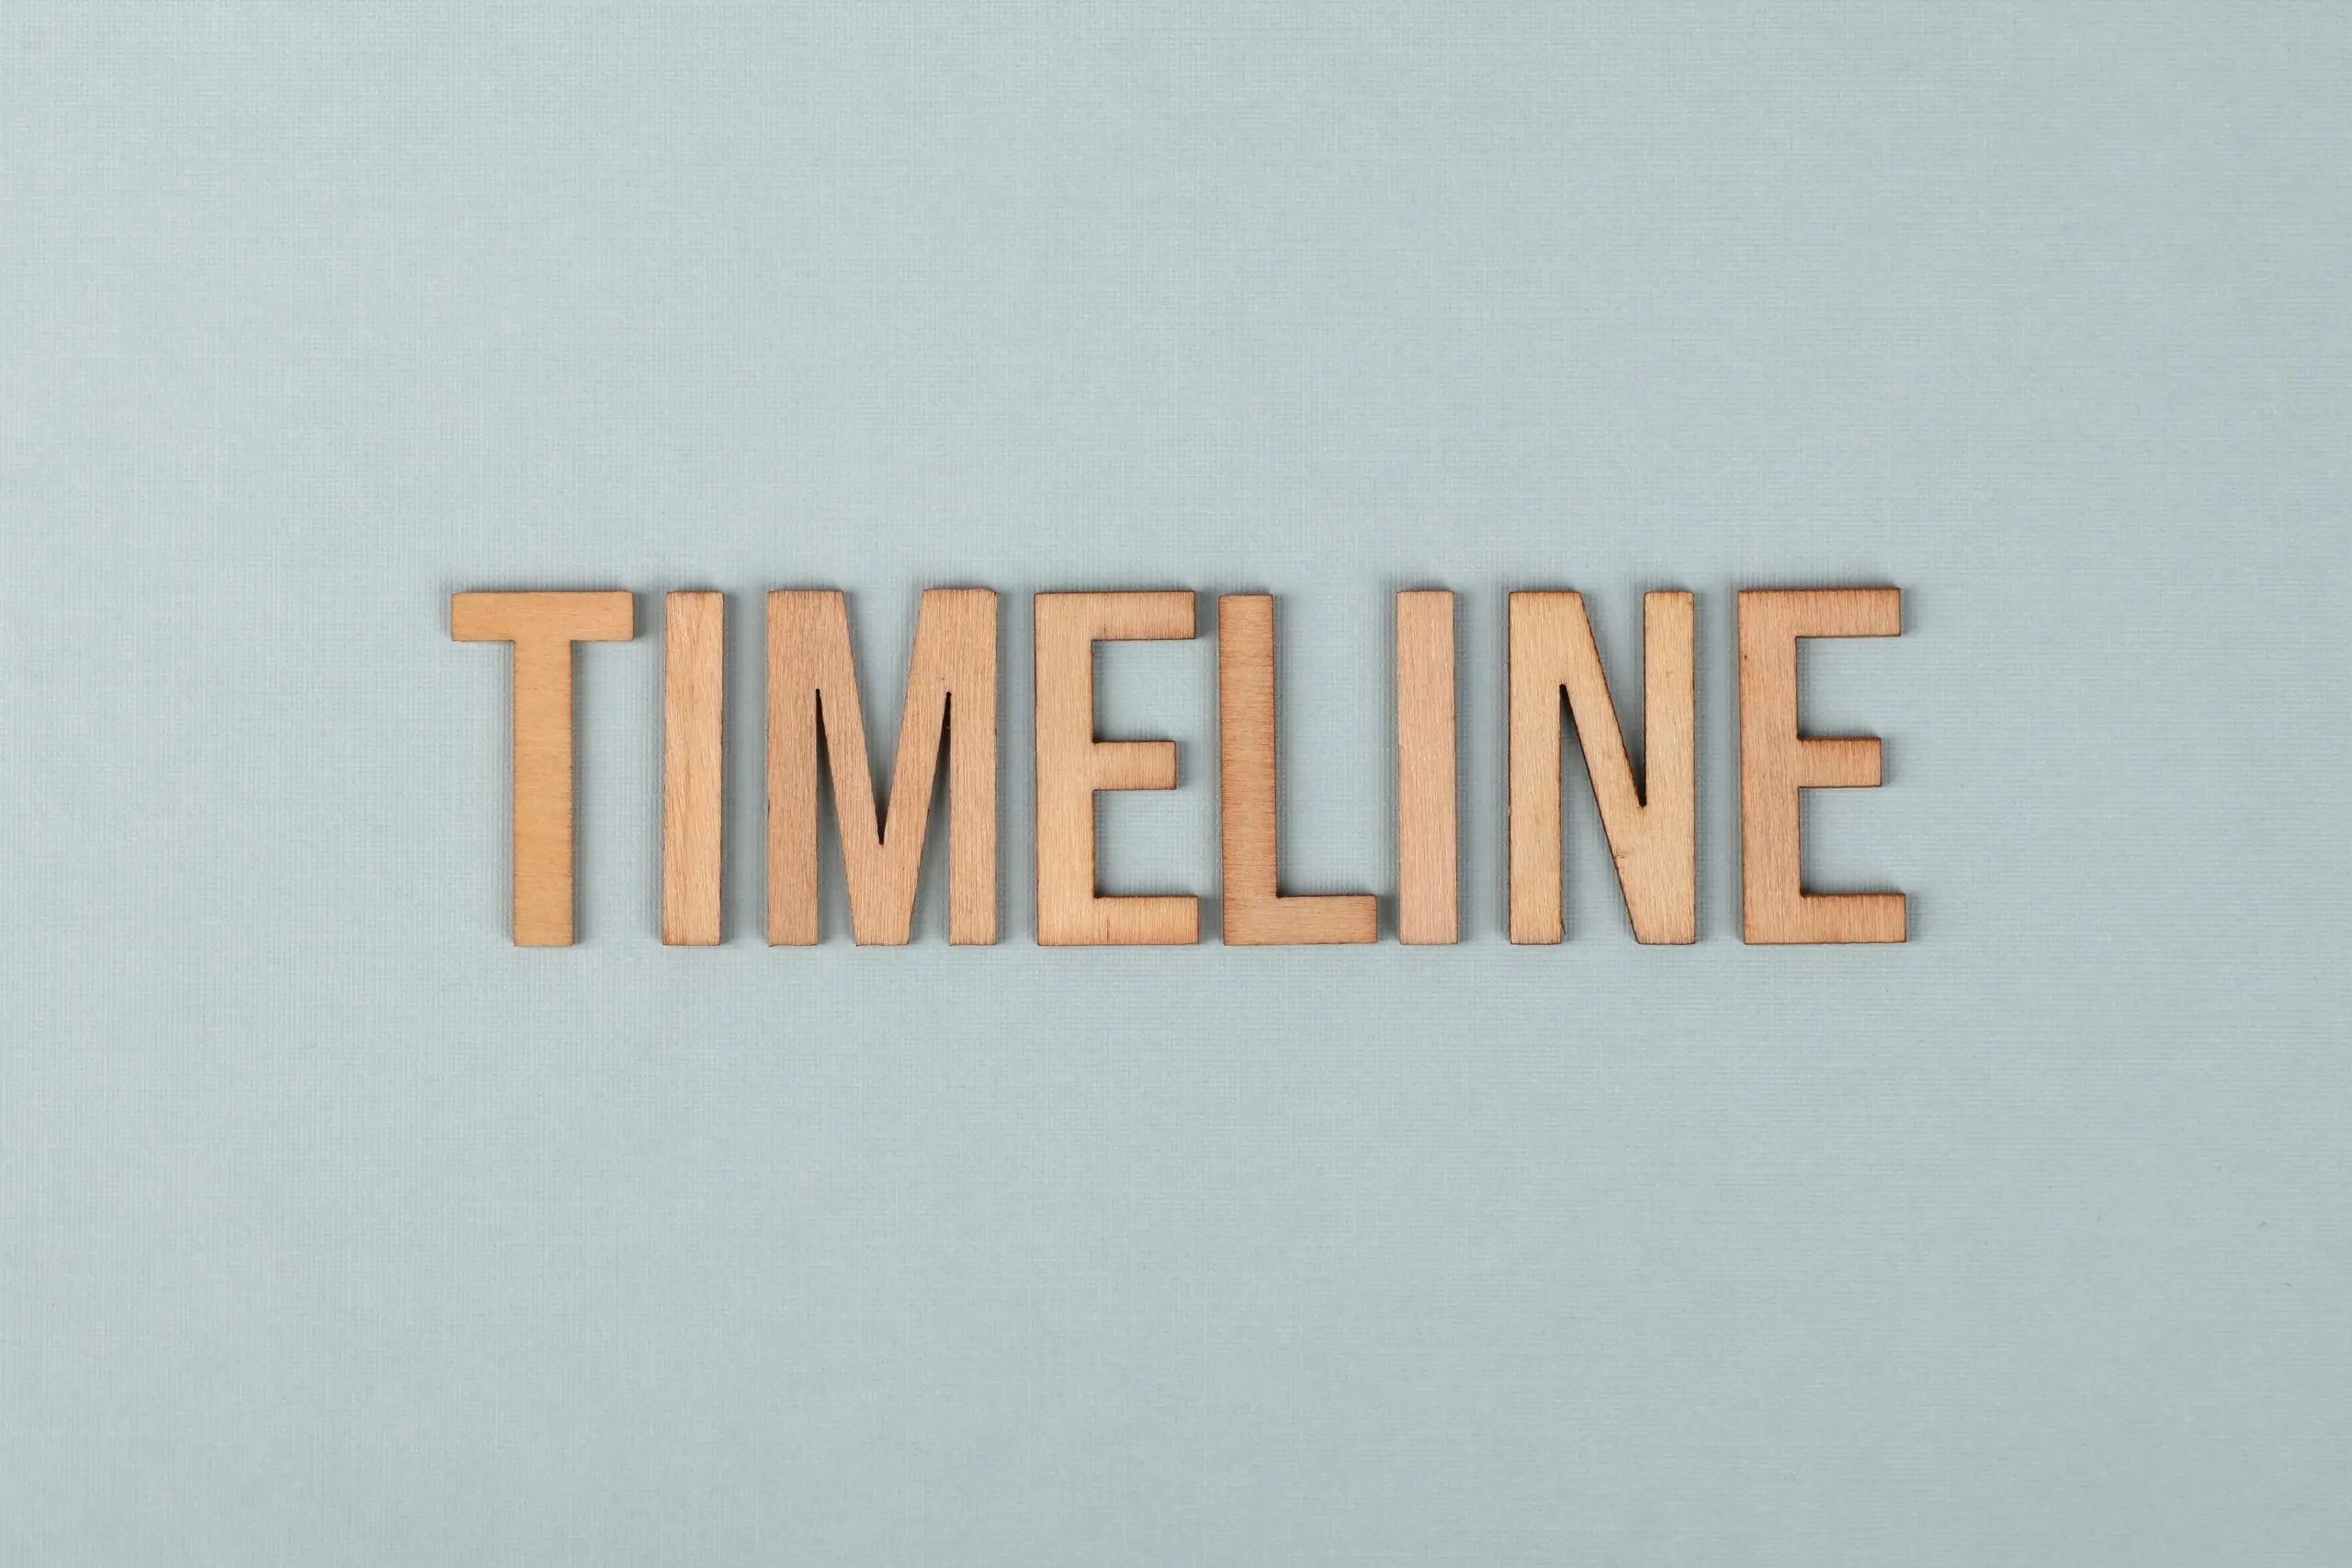 Wooden letters spelling out "Timeline"